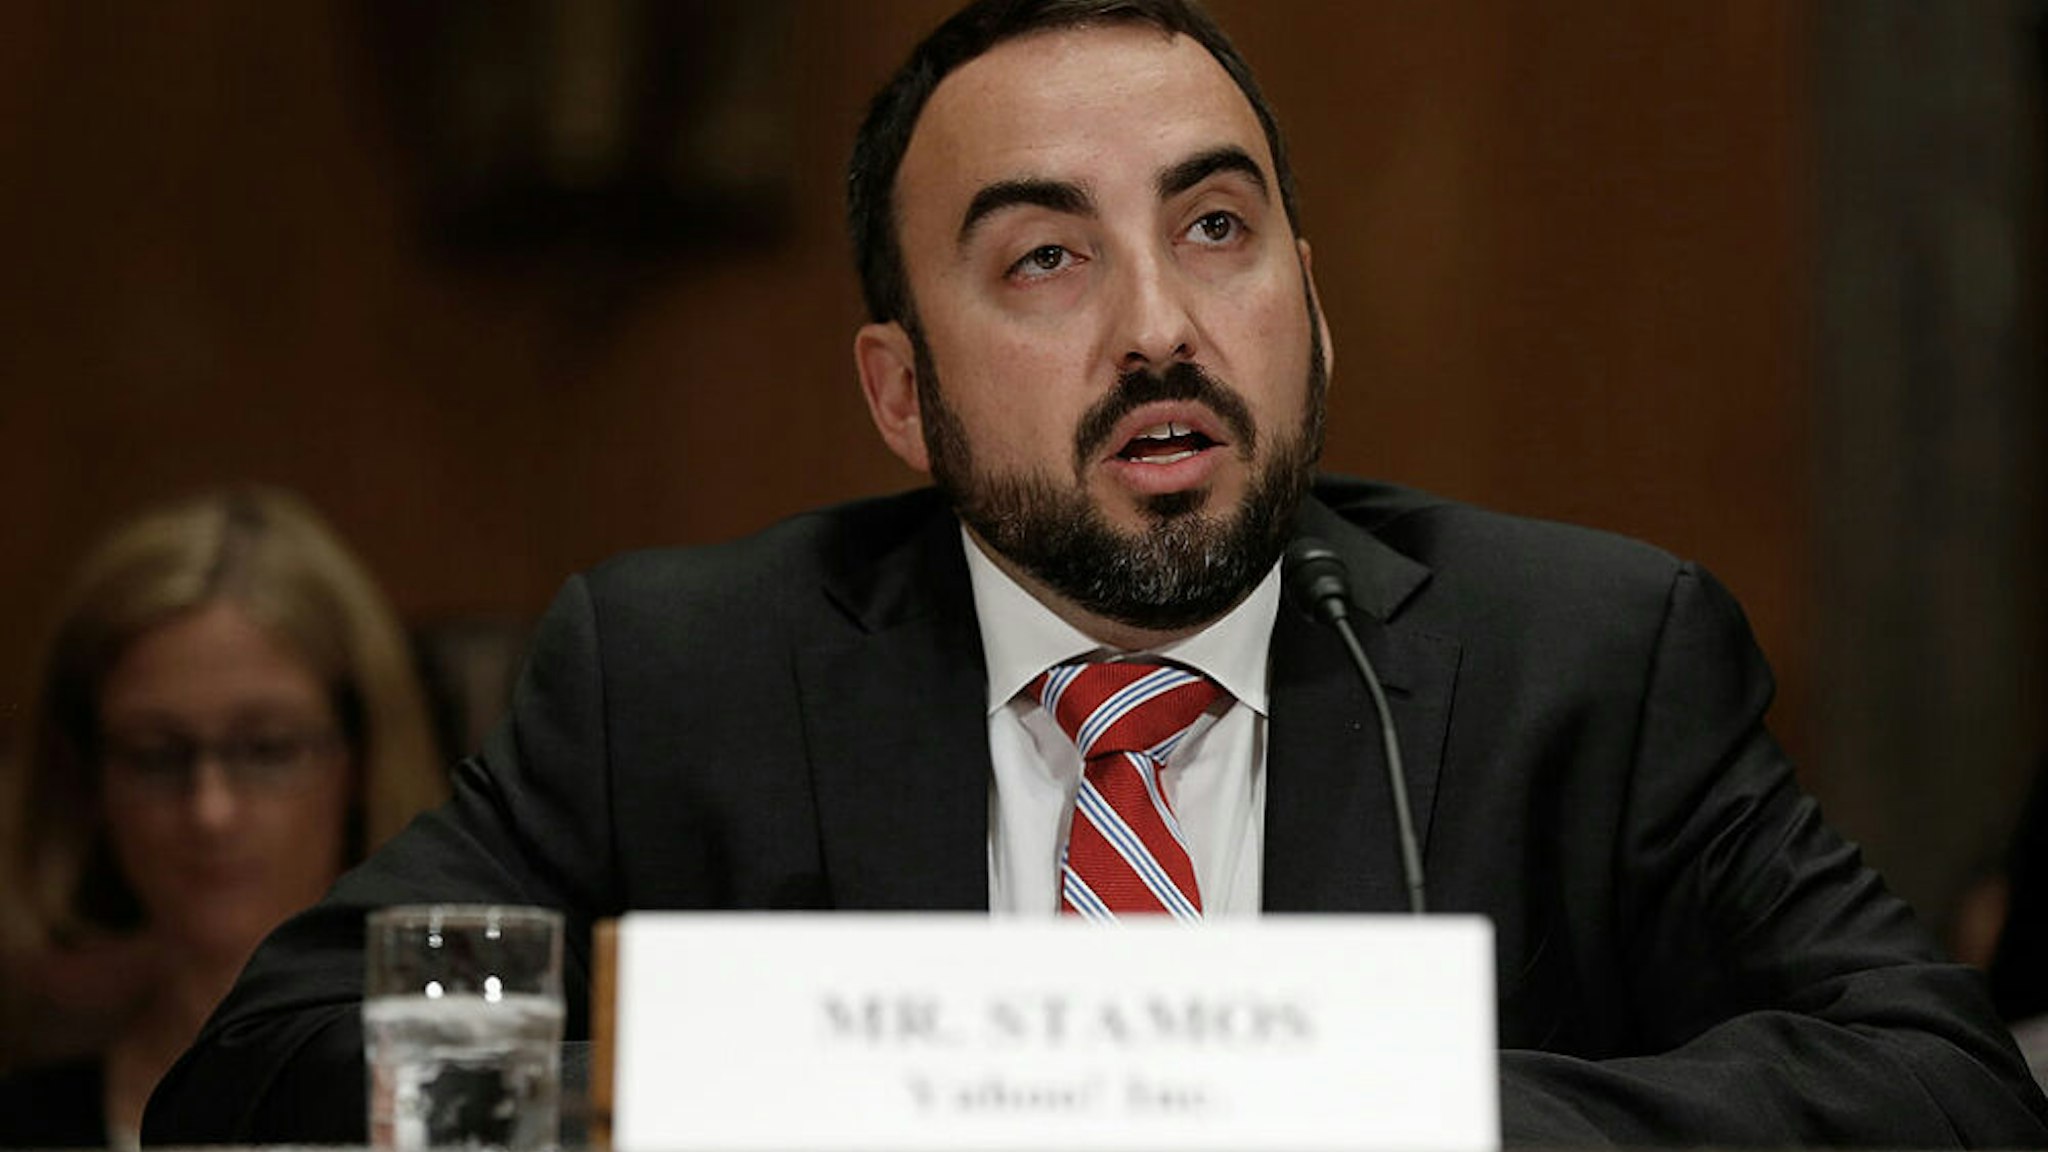 WASHINGTON, DC - MAY 15: Alex Stamos, chief information security officer at Yahoo! Inc testifies before the Senate Homeland Security Committee May 15, 2014 in Washington, DC. The committee heard testimony on the topic of on "Online Advertising and Hidden Hazards to Consumer Security and Data Privacy."